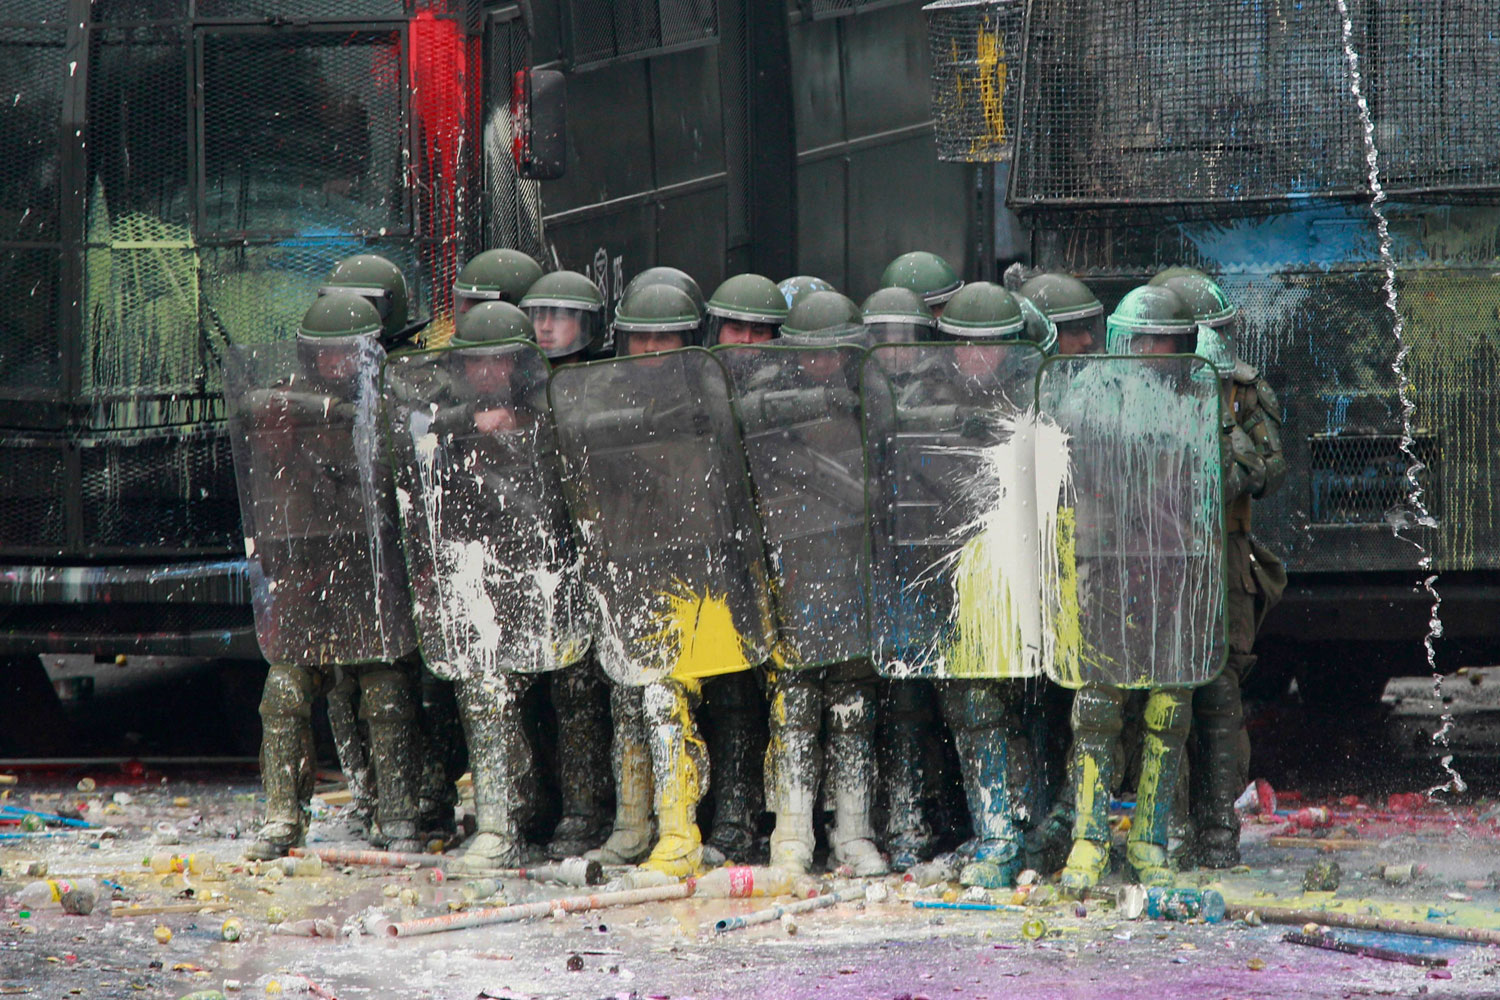 August 25, 2011. Police are pelted with paint thrown by demonstrators near the presidential palace in Santiago, Chile. A two-day strike that began as a student protest for free education mushroomed into a larger movement for reforms to labor laws and pensions and increases in corporate taxes to fund health and education.